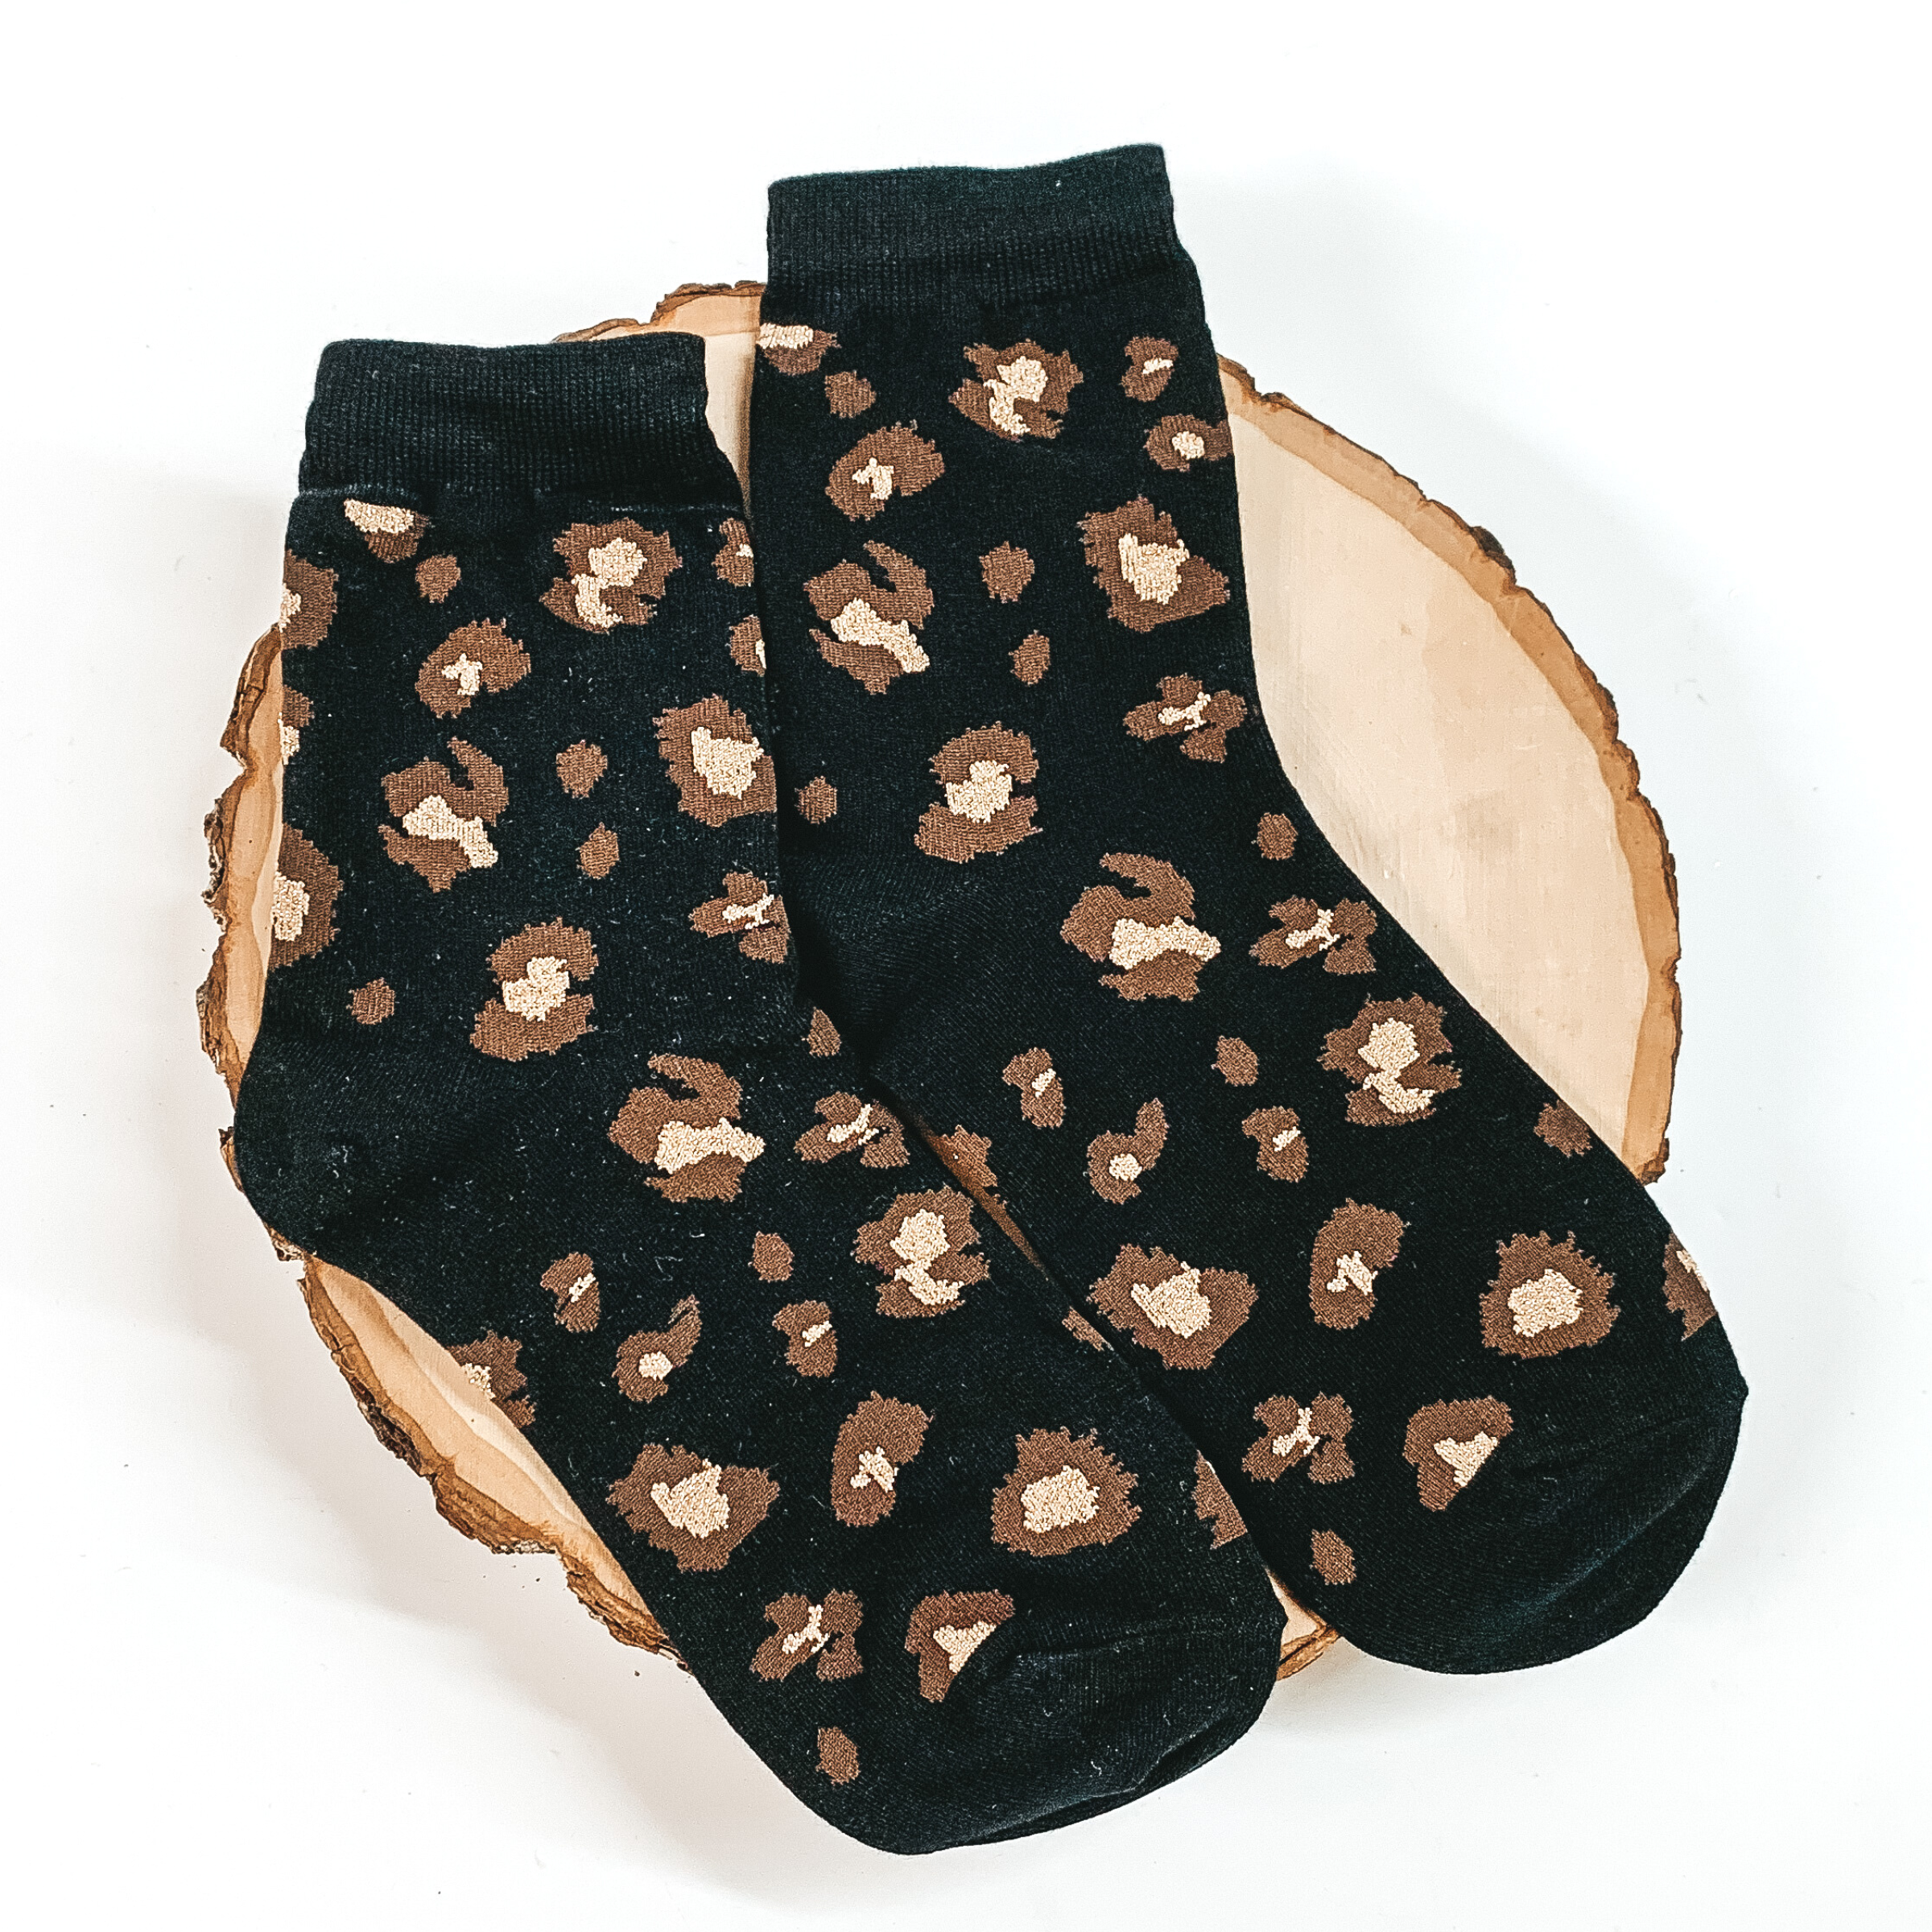 Black ankle socks with a brown and champagne leopard print. These socks are pictured on a piece of wood on a white background. 